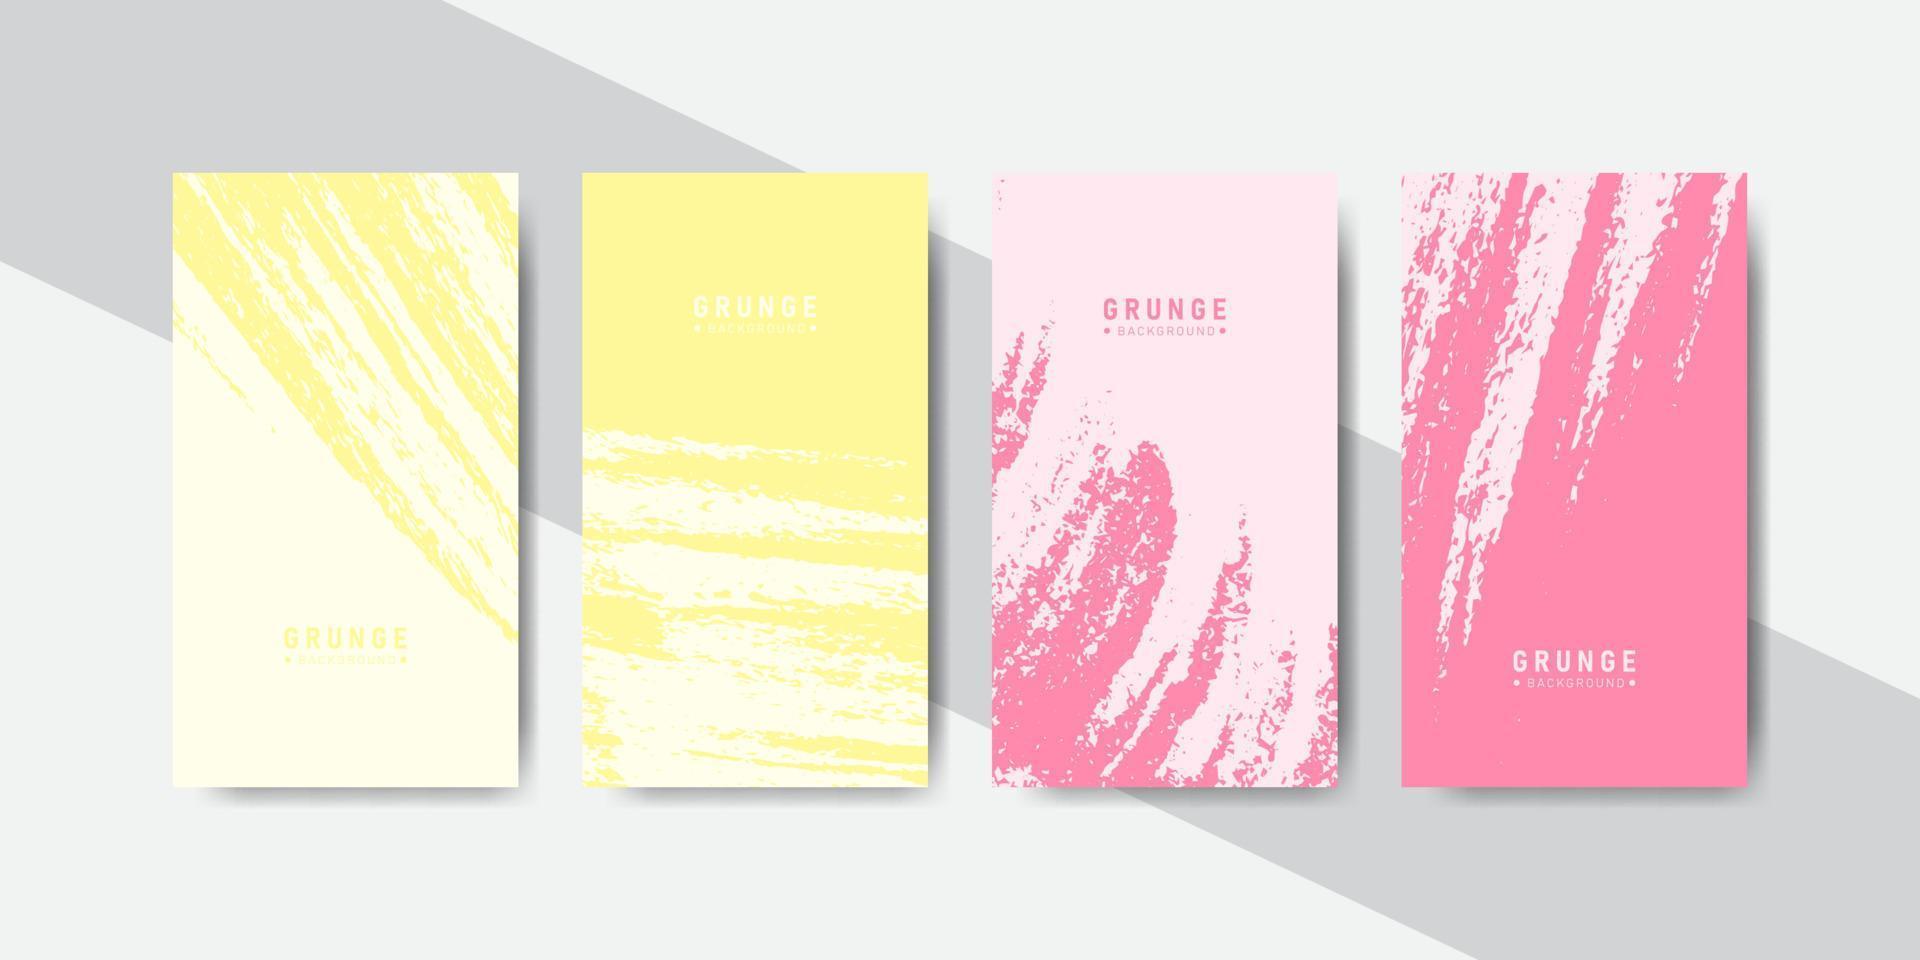 yellow and red pastel colors abstract grunge banners collection for social media template stories vector